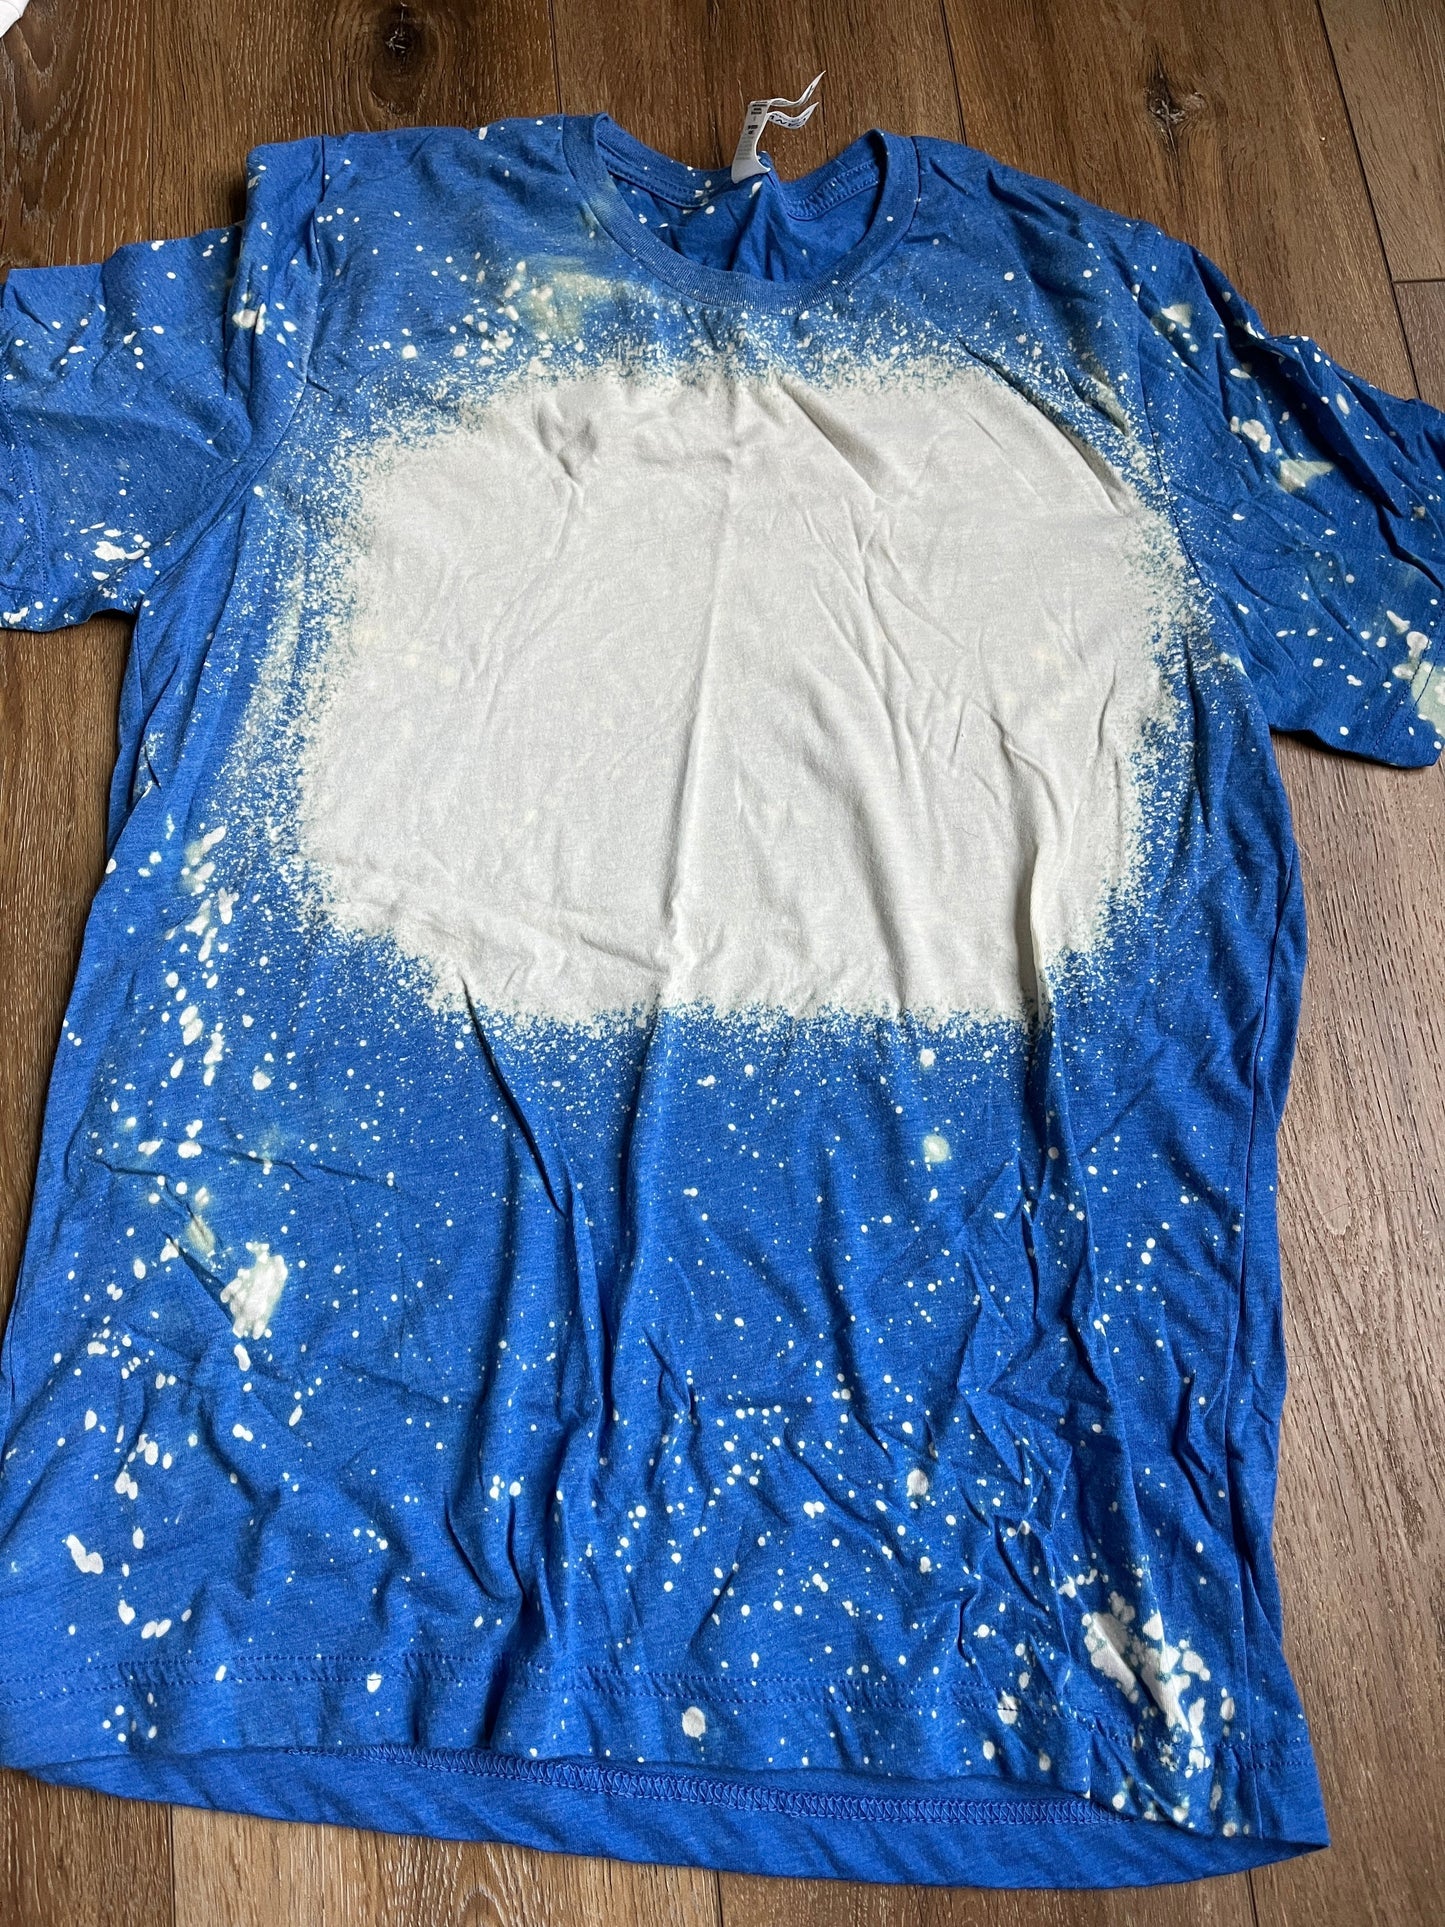 Size XL Build Your Own Bleached Tee--CHOOSE DESIGN IN GROUP